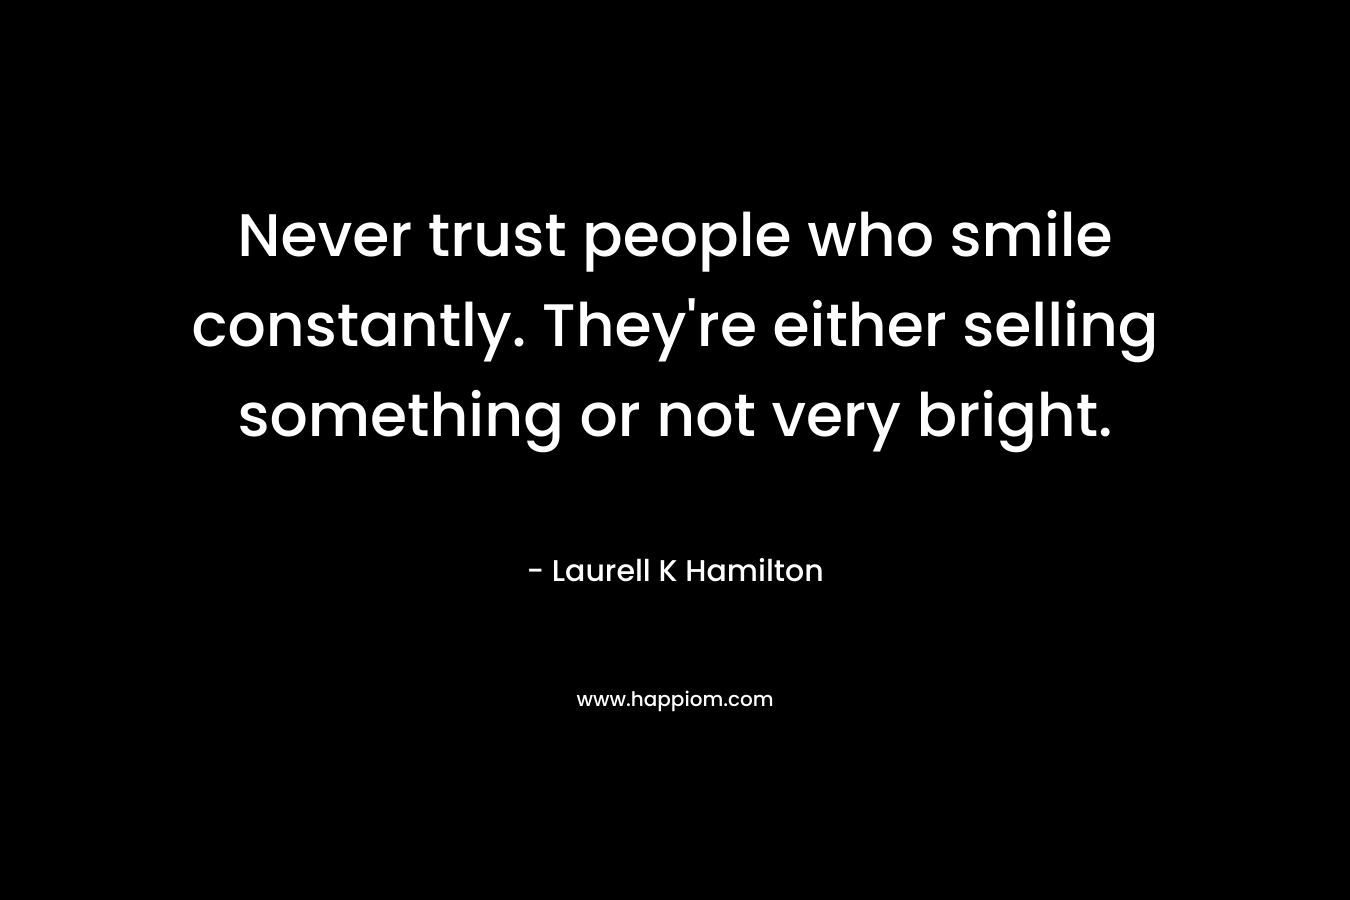 Never trust people who smile constantly. They're either selling something or not very bright.